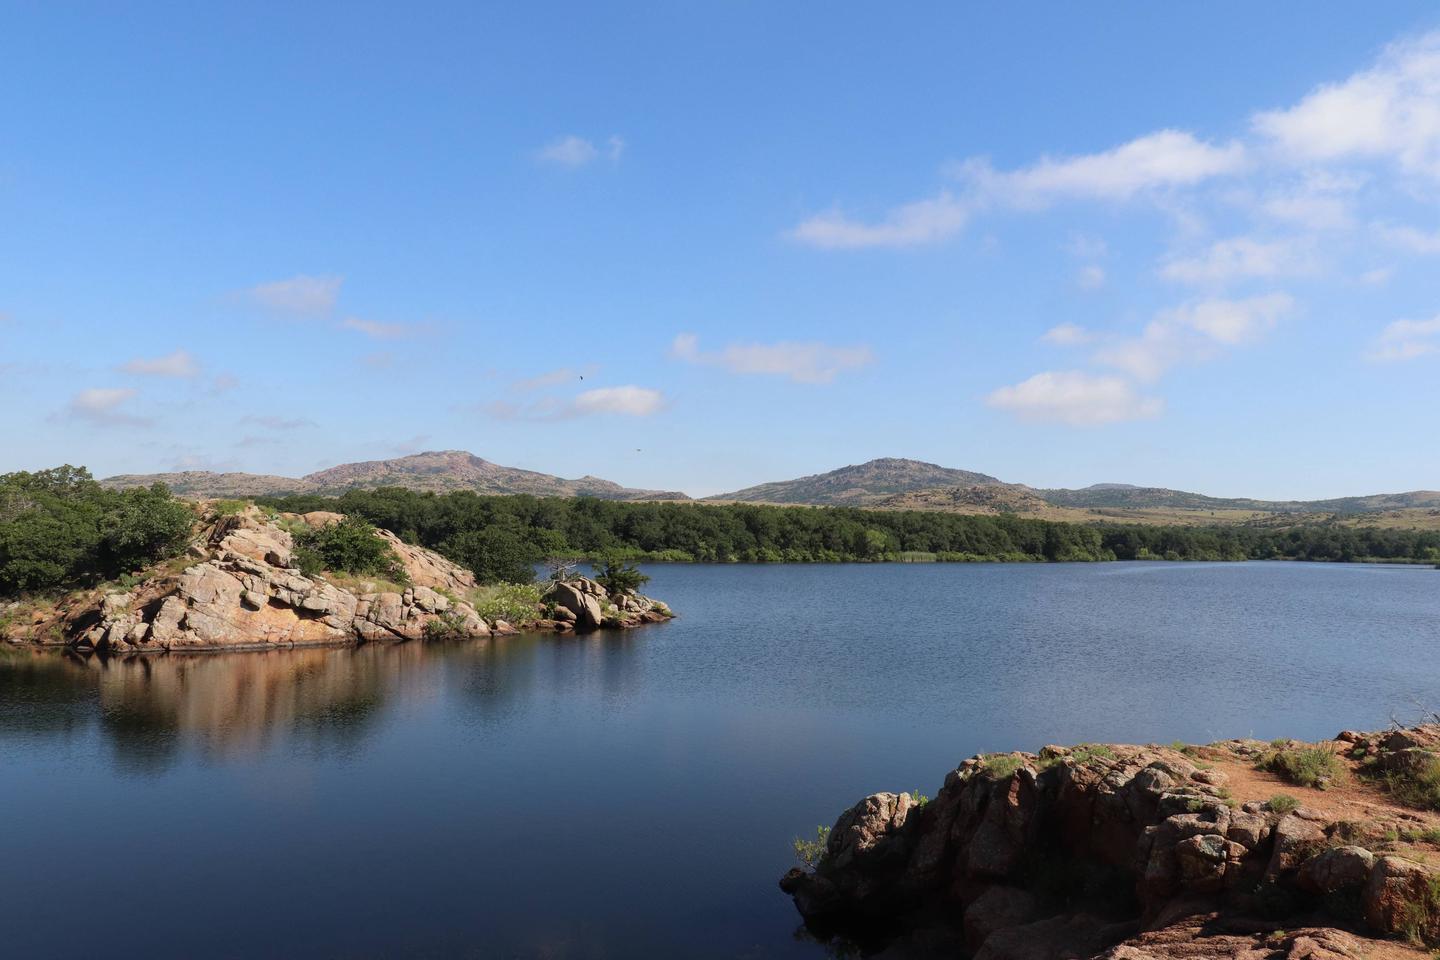 The Wichita Mountains line the horizon beyond the pink granite shore of Quanah Parker Lake.The Wichita Mountains line the horizon beyond the shore of Quanah Parker Lake.